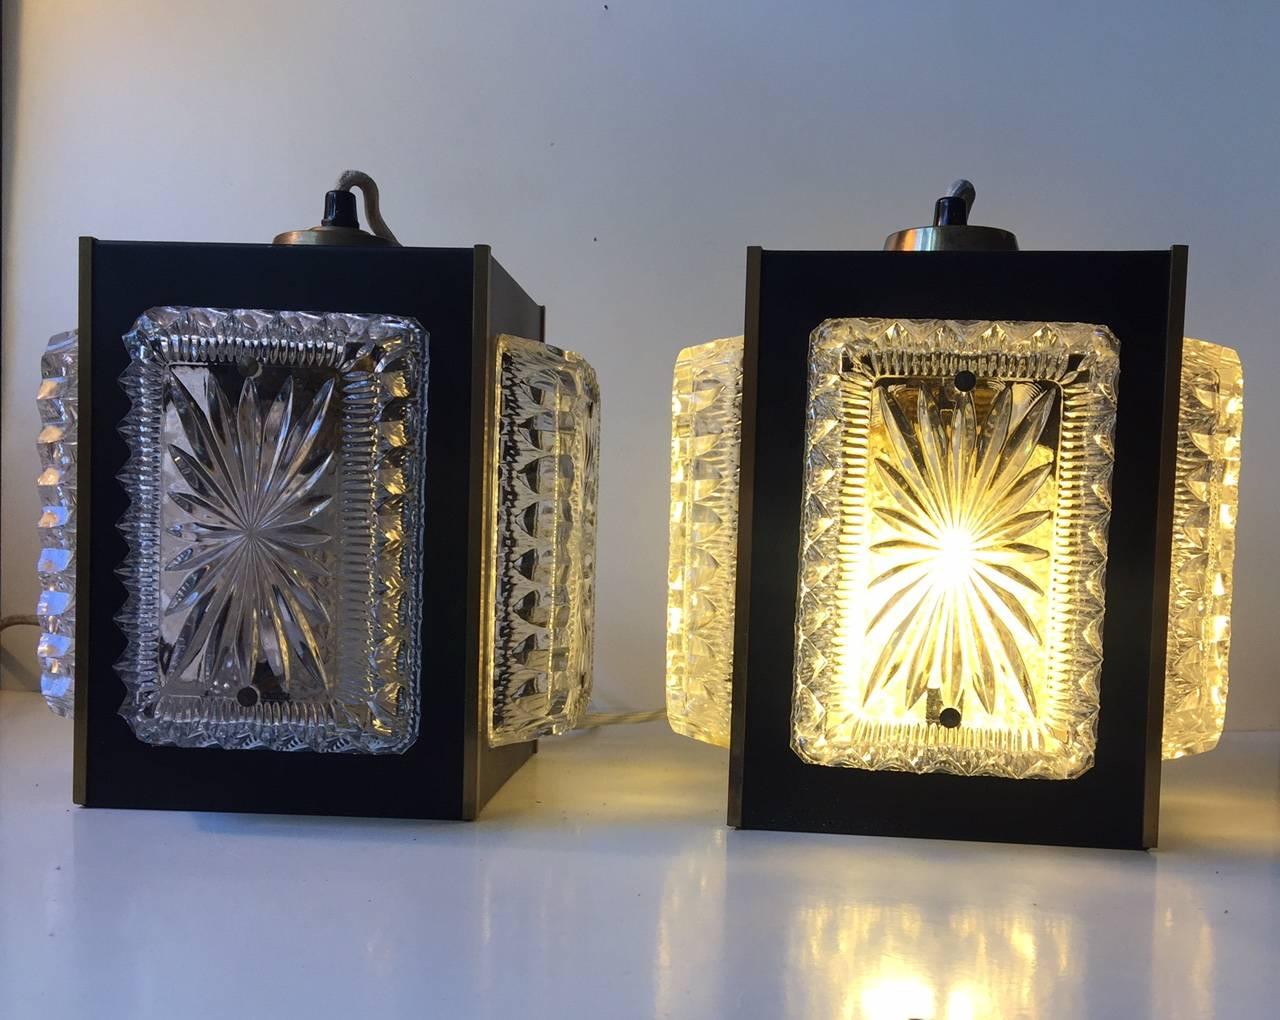 Austrian Midcentury Crystal and Brass Ceiling Lamps, Vienna, Austria, 1950s For Sale